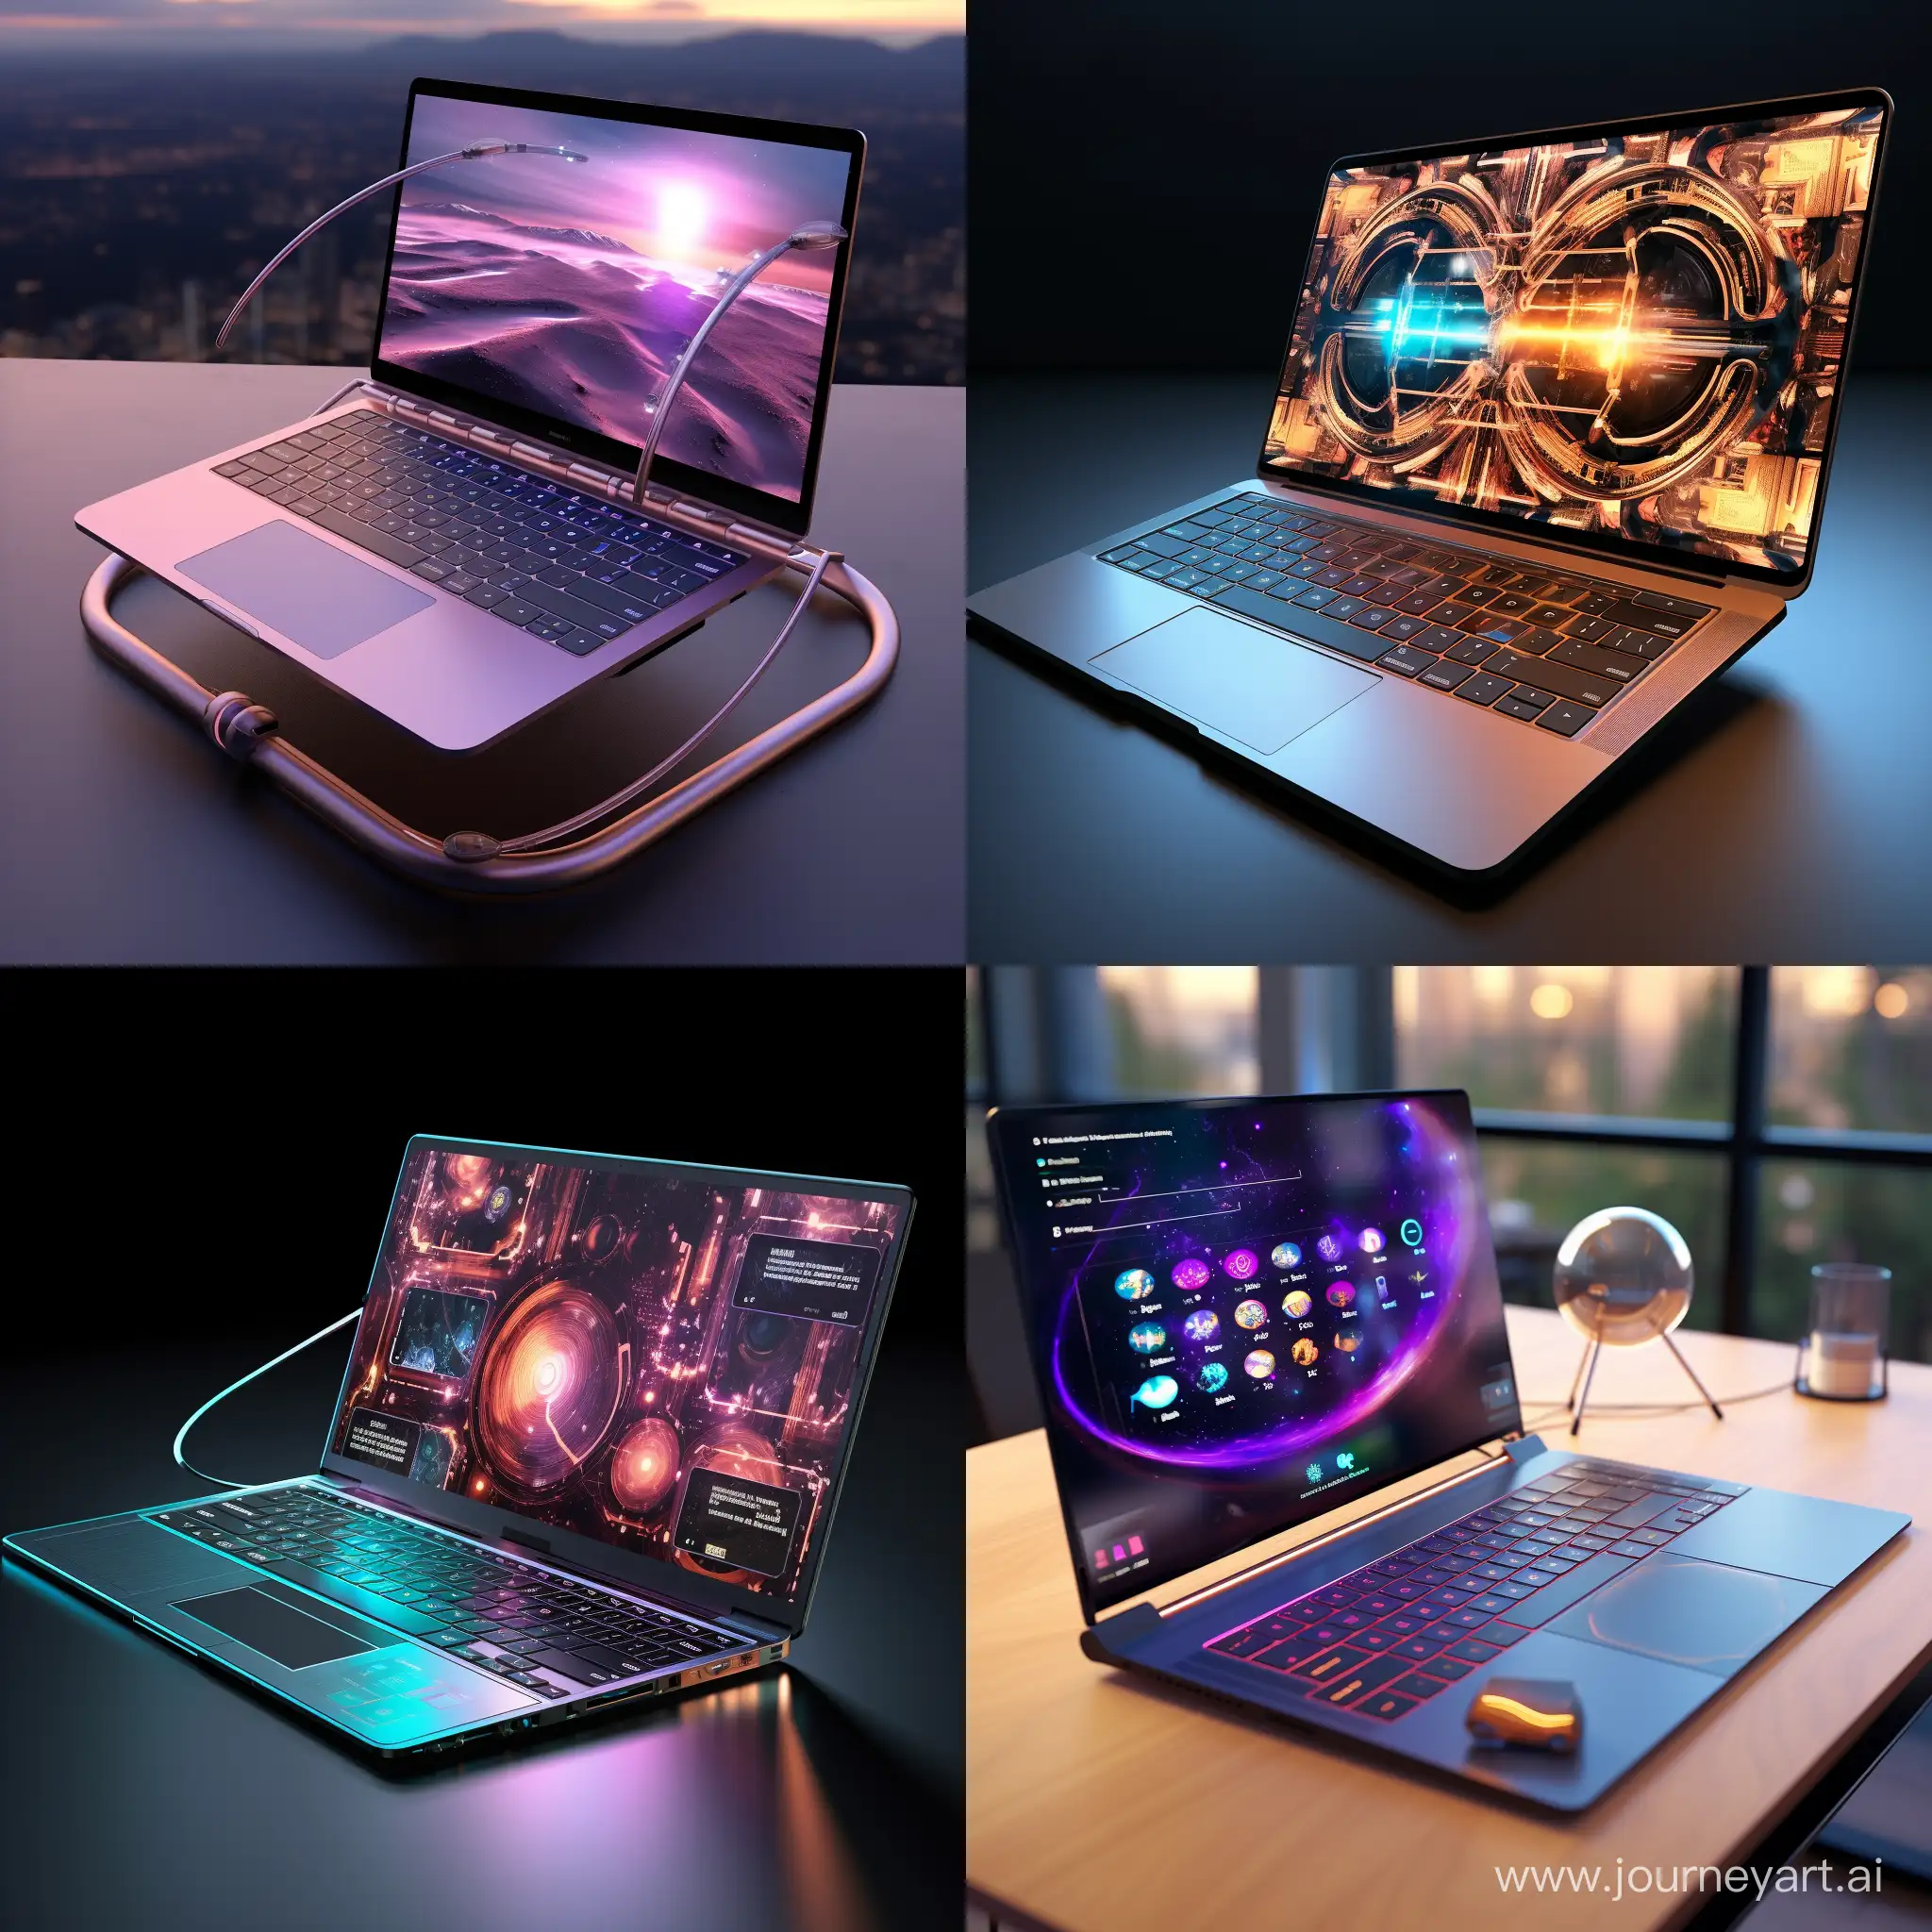 Futuristic-Laptop-with-Flexible-Display-and-AIPowered-Features